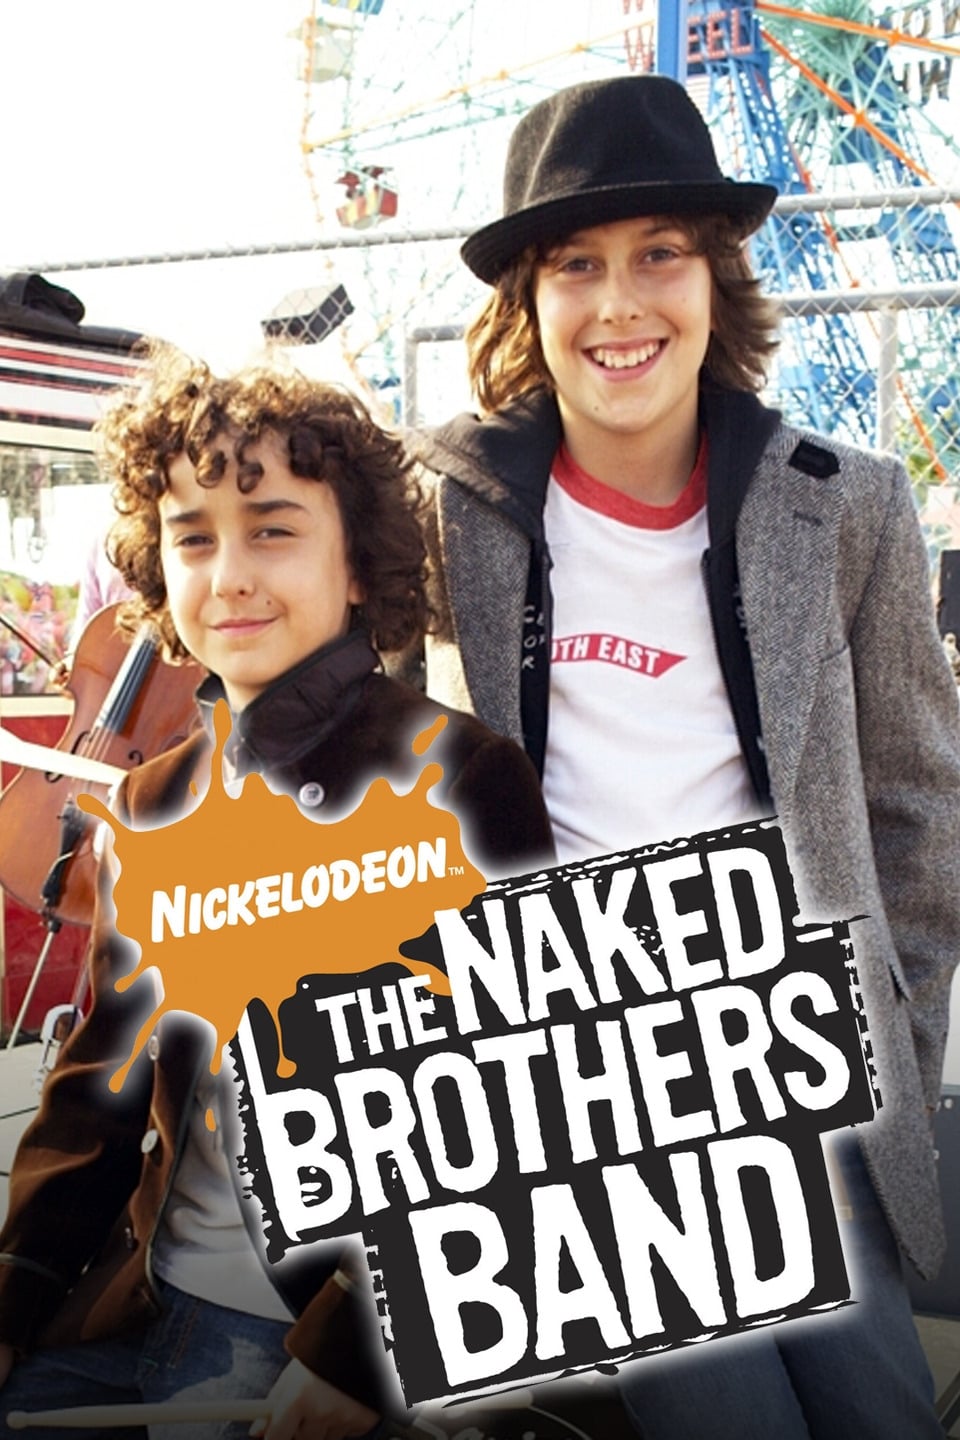 Sex The Naked Brothers Band Tickets Pics